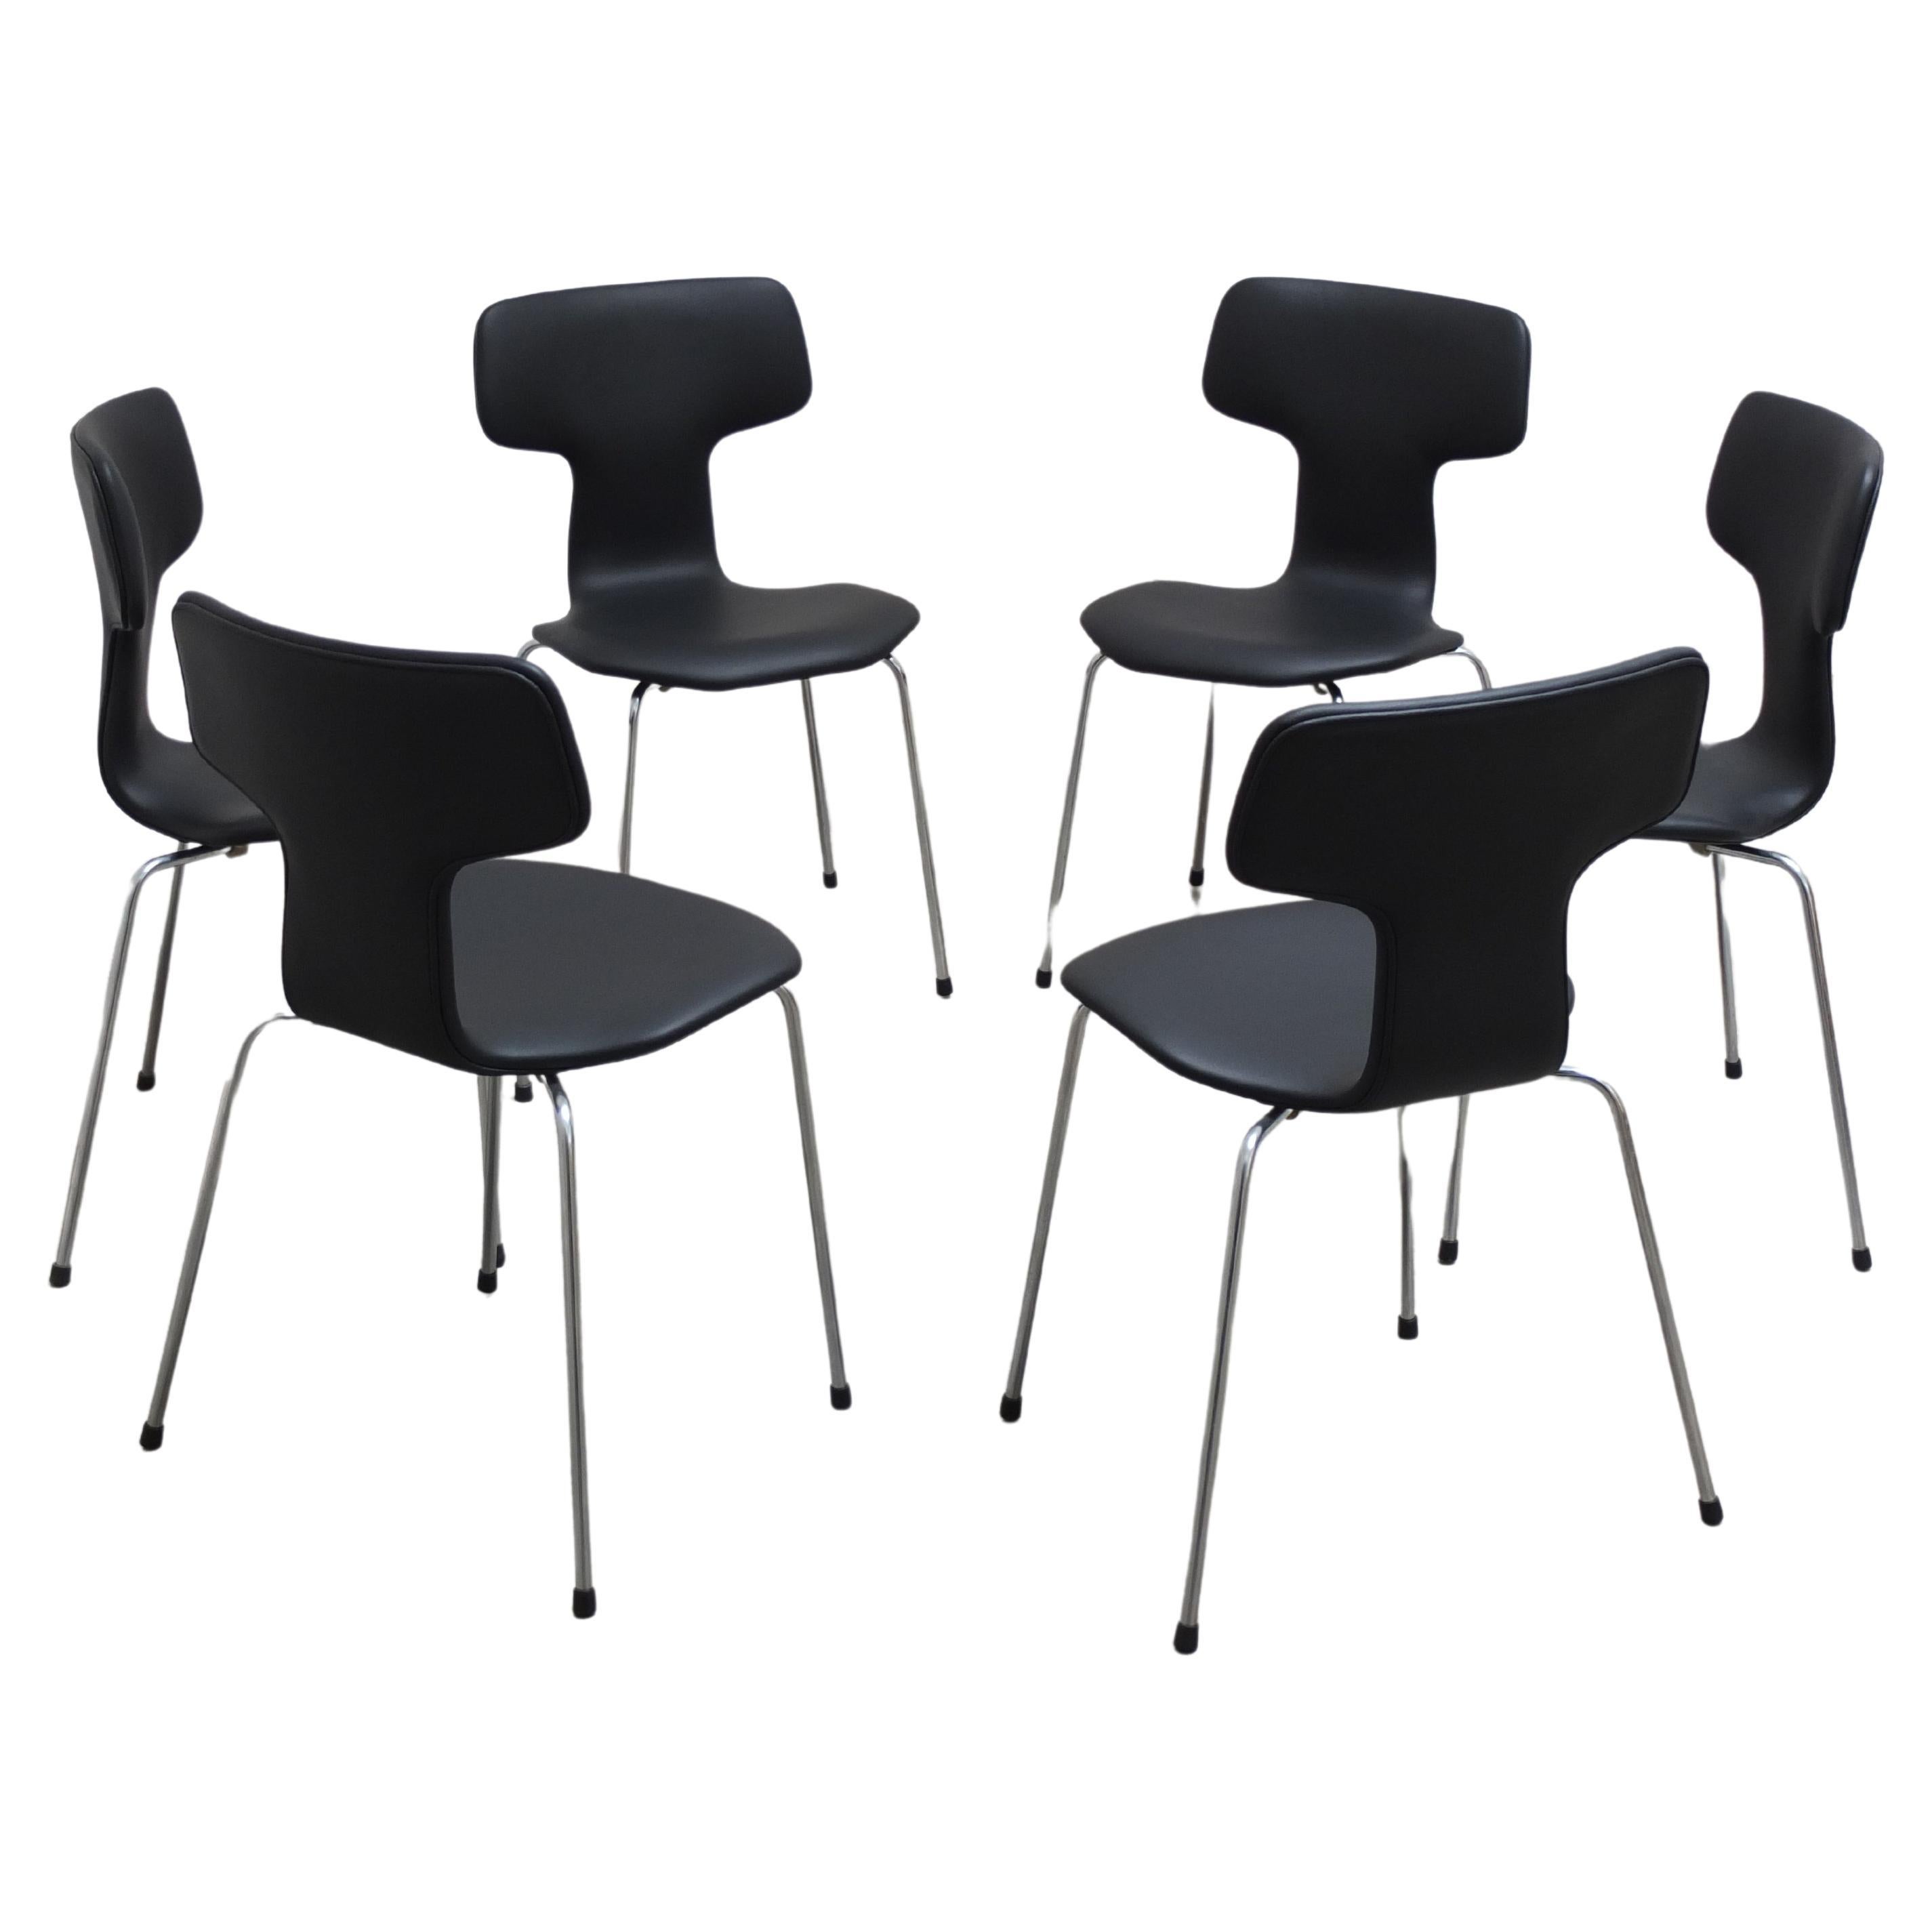 Set of 6 'Hammer' Chairs in Leather by Arne Jacobsen for Fritz Hansen, 1967 For Sale